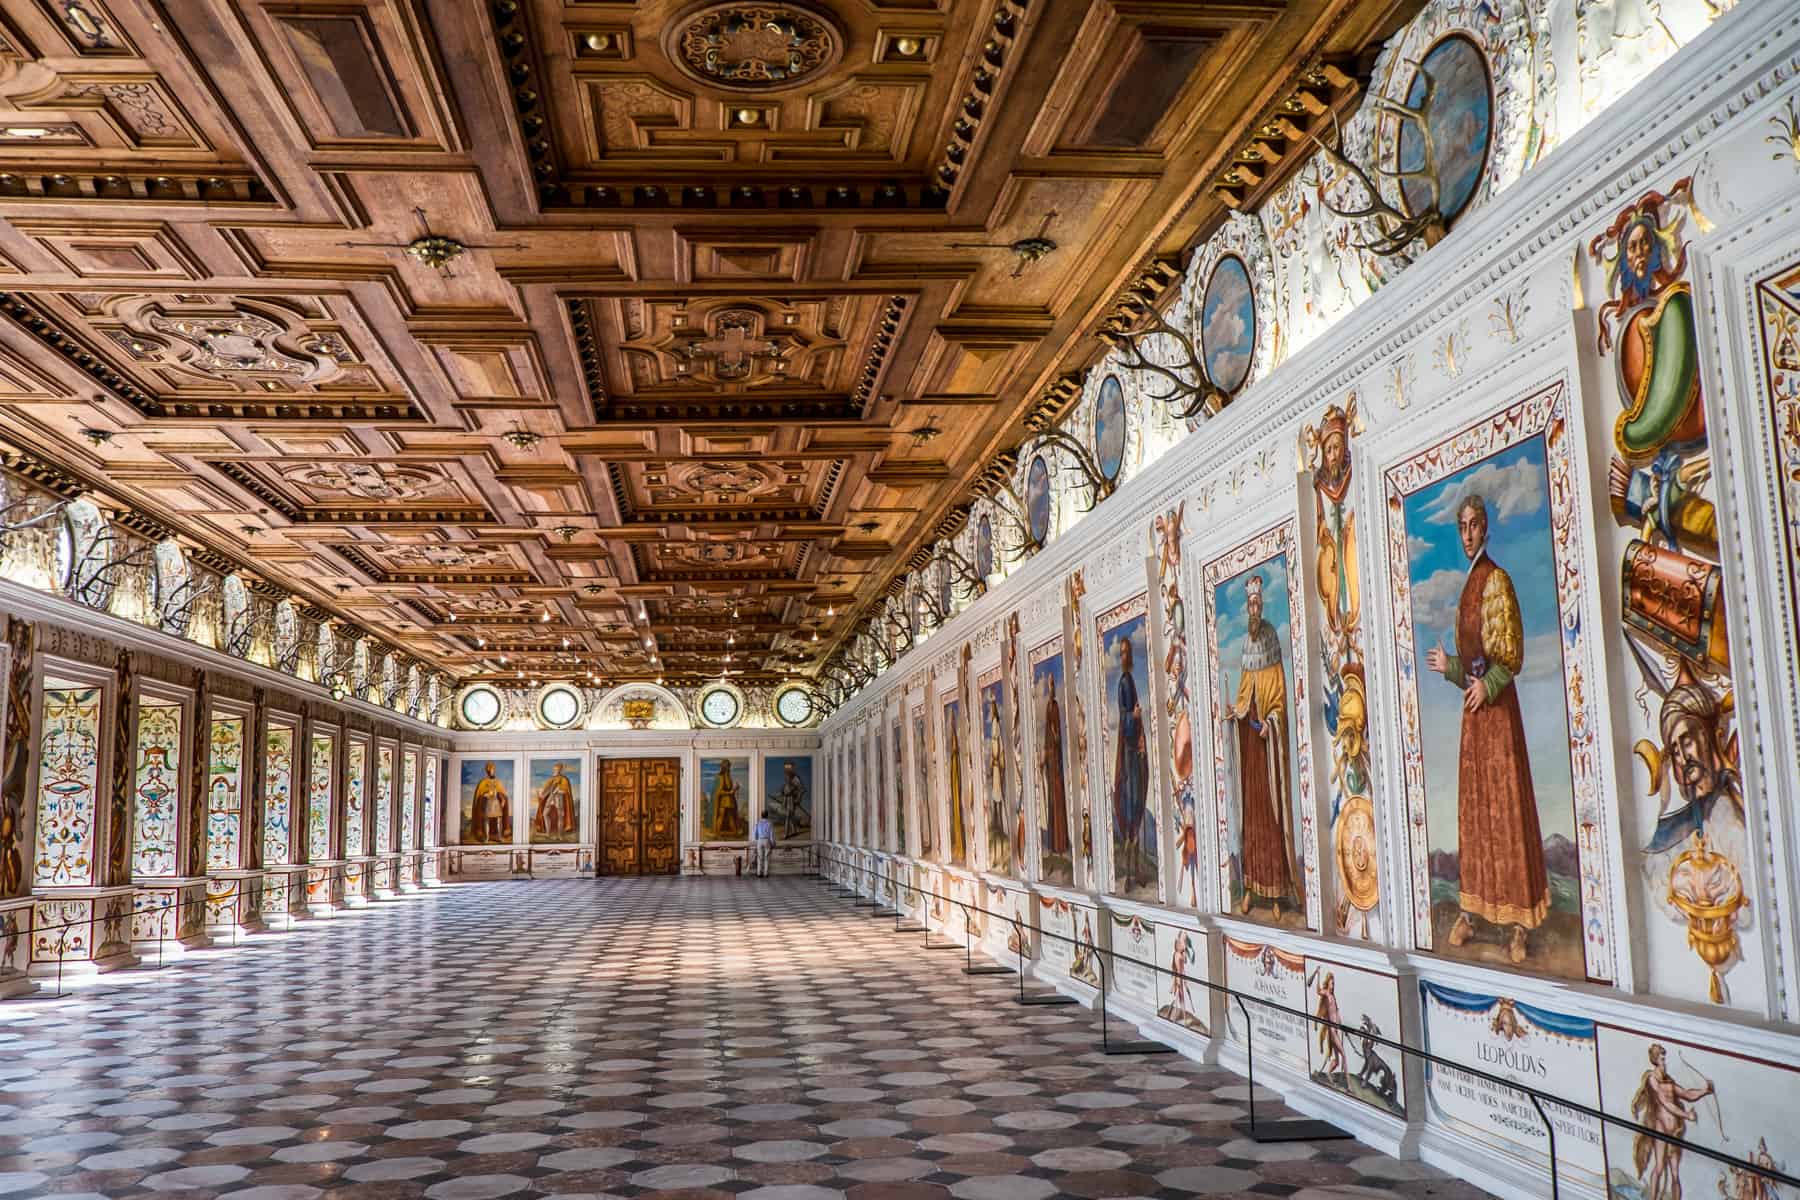 A wooden ceiling, tiled floored and old wall paintings of rulers line a grand hallway in Innbruck's Ambras Castle